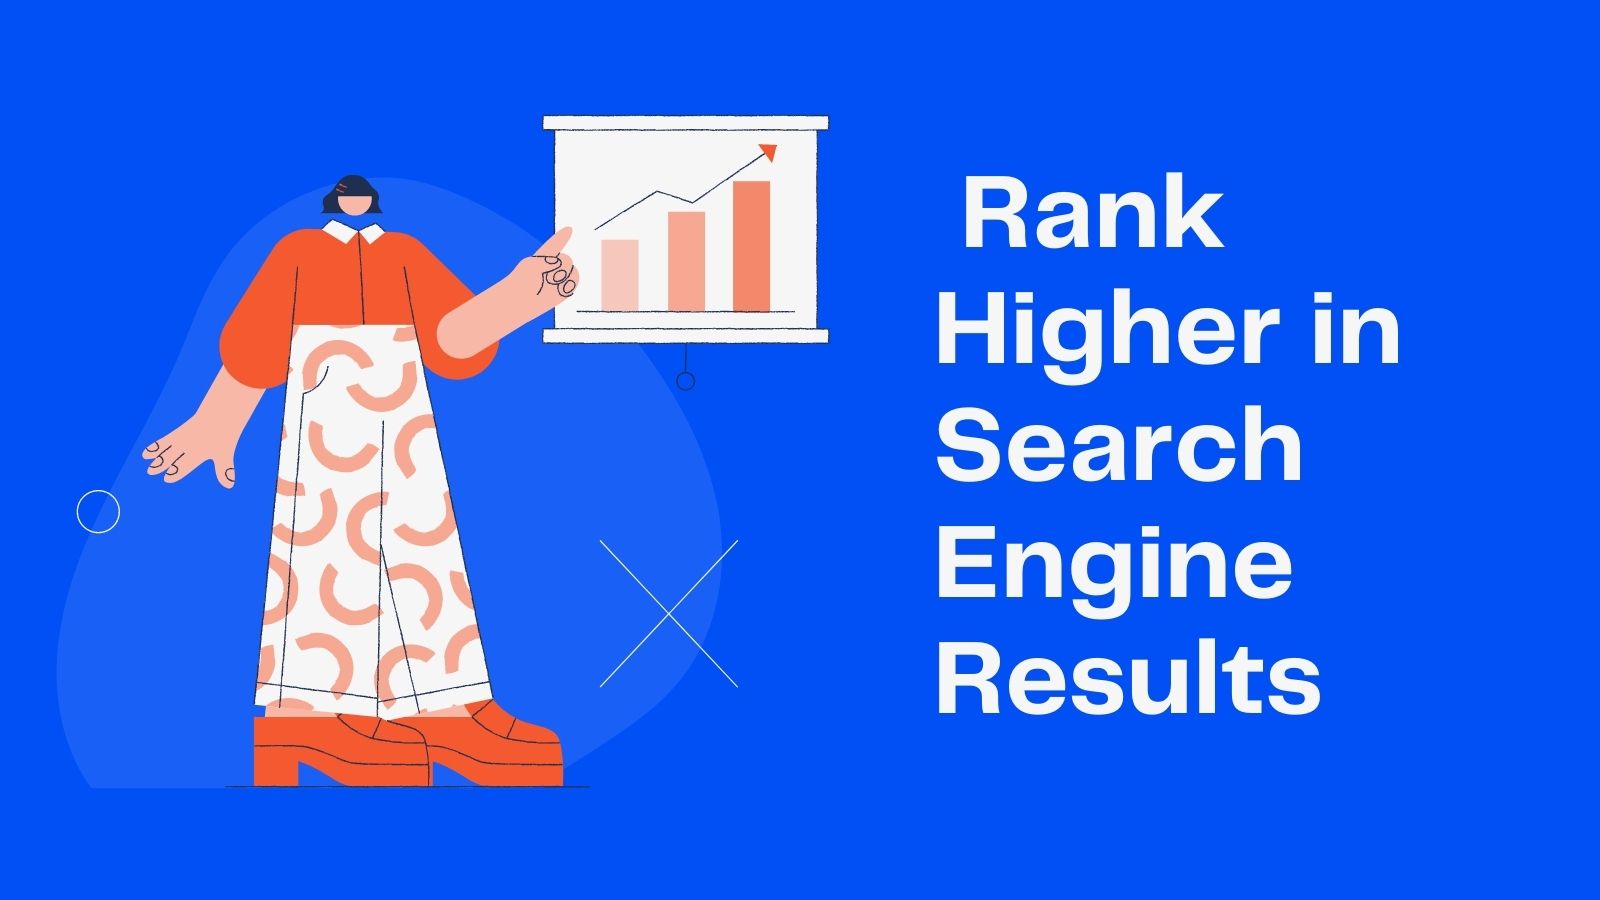 Try to Rank Higher in Search Engine Results